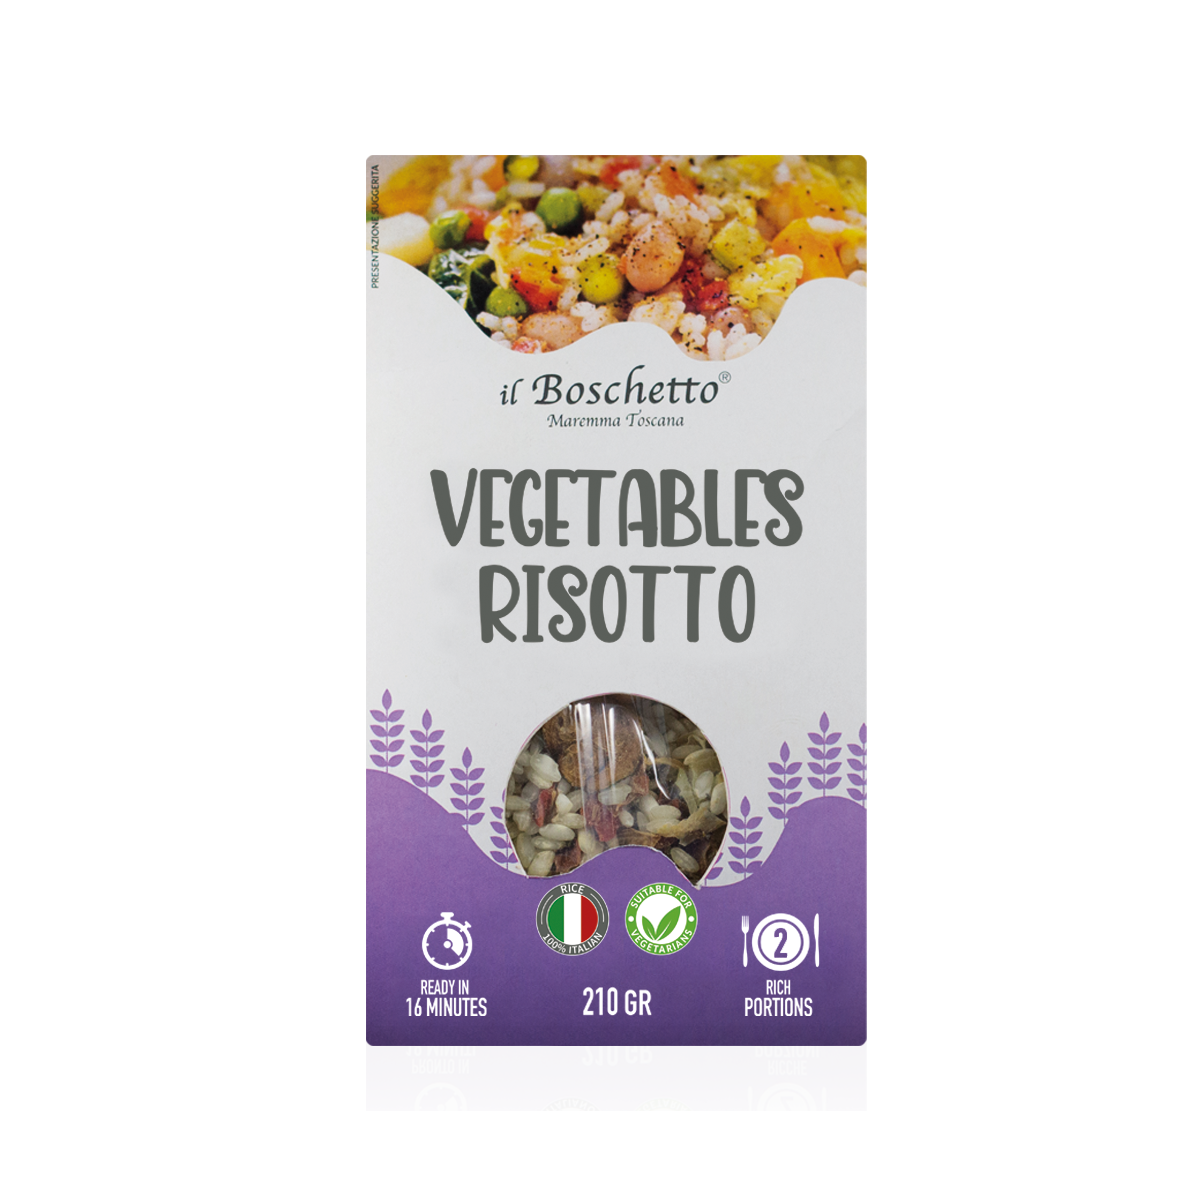 Vegetables Risotto